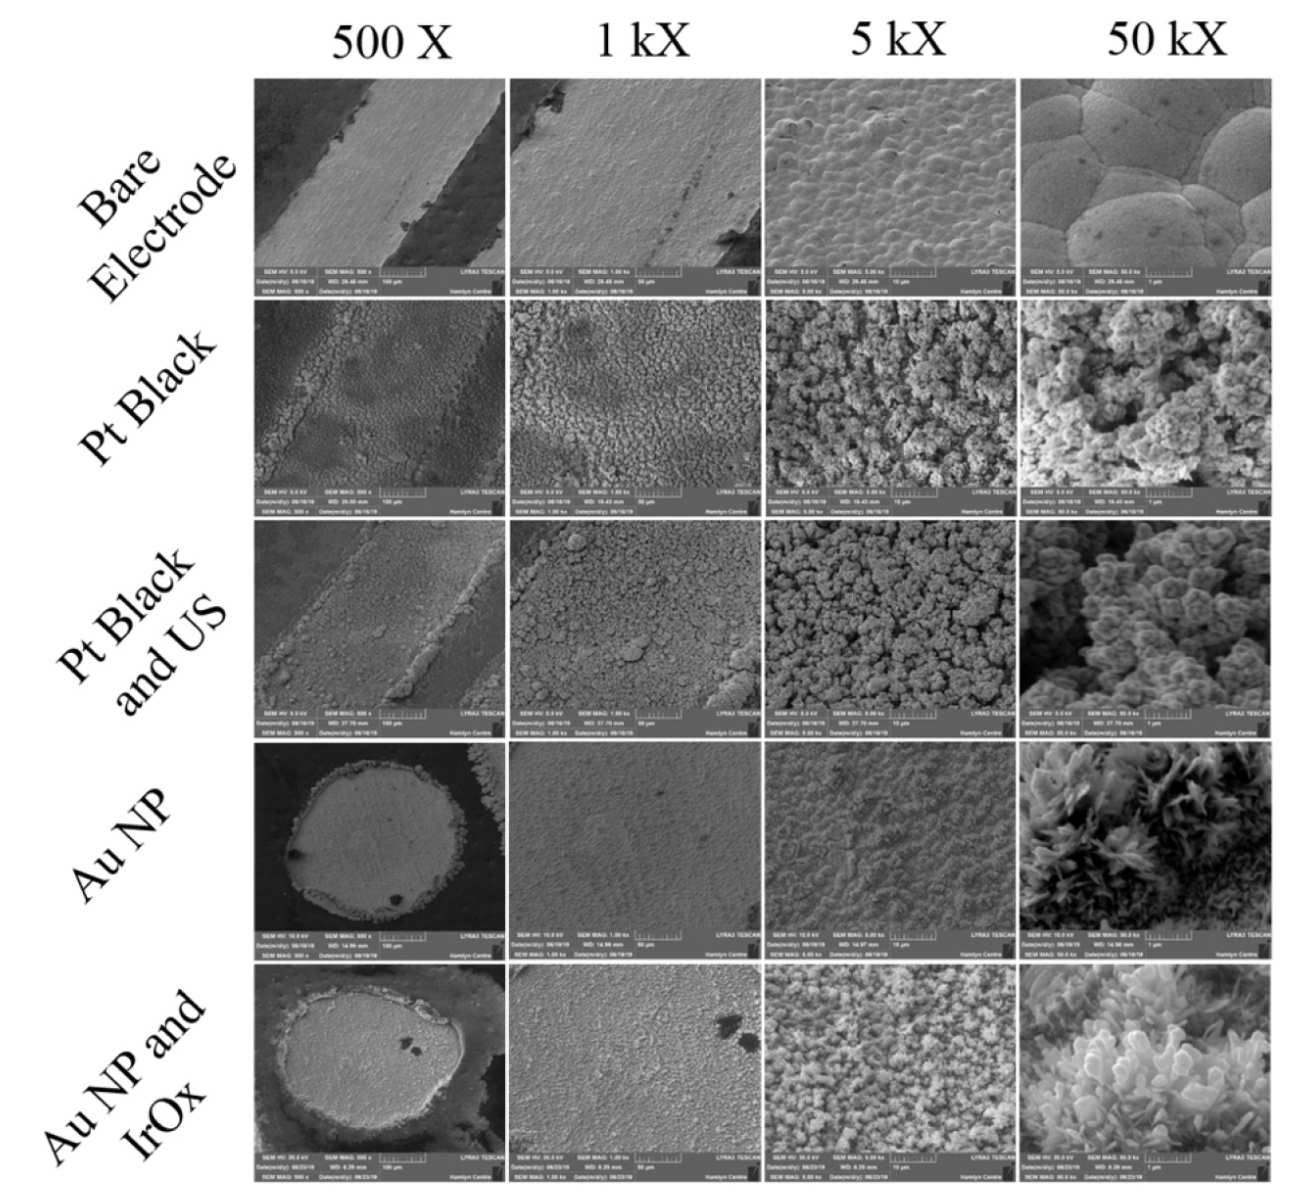 SEM images at different magnifications, showing electrode surfaces from the as received electrodes and following electrochemical depositions.